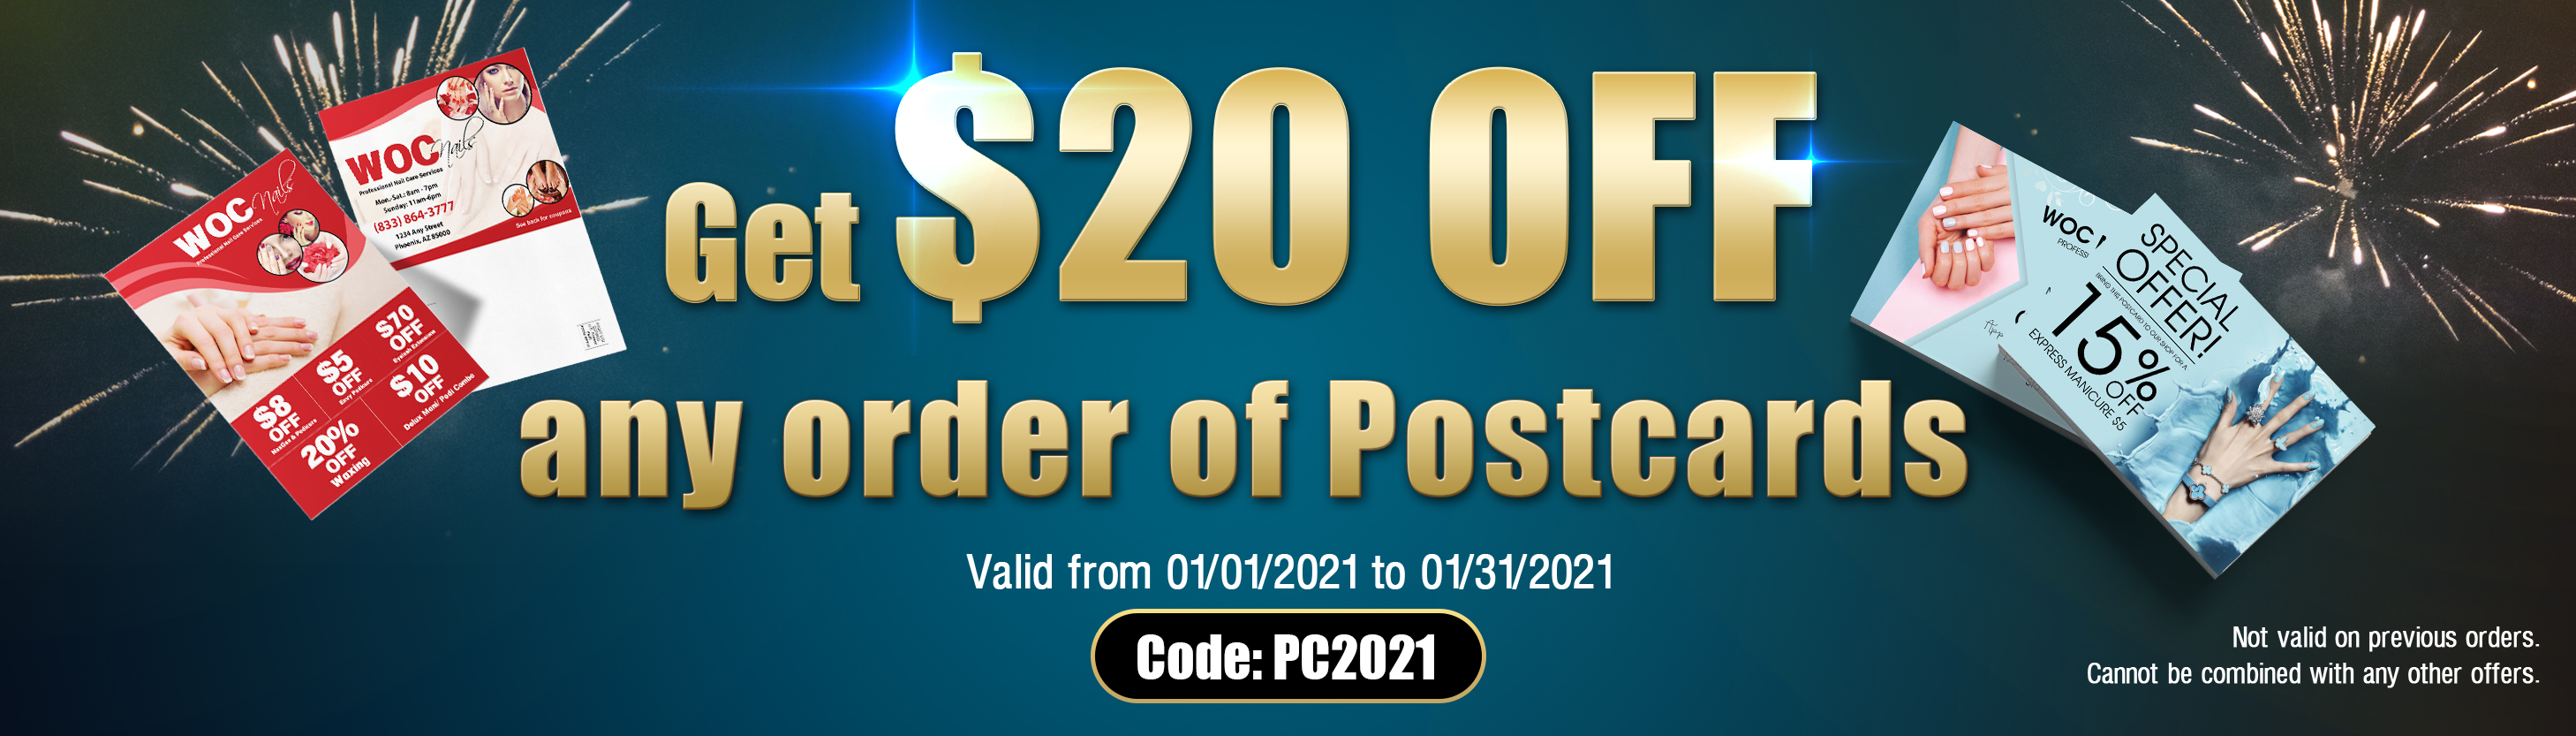 Get $20 off any order of Postcards